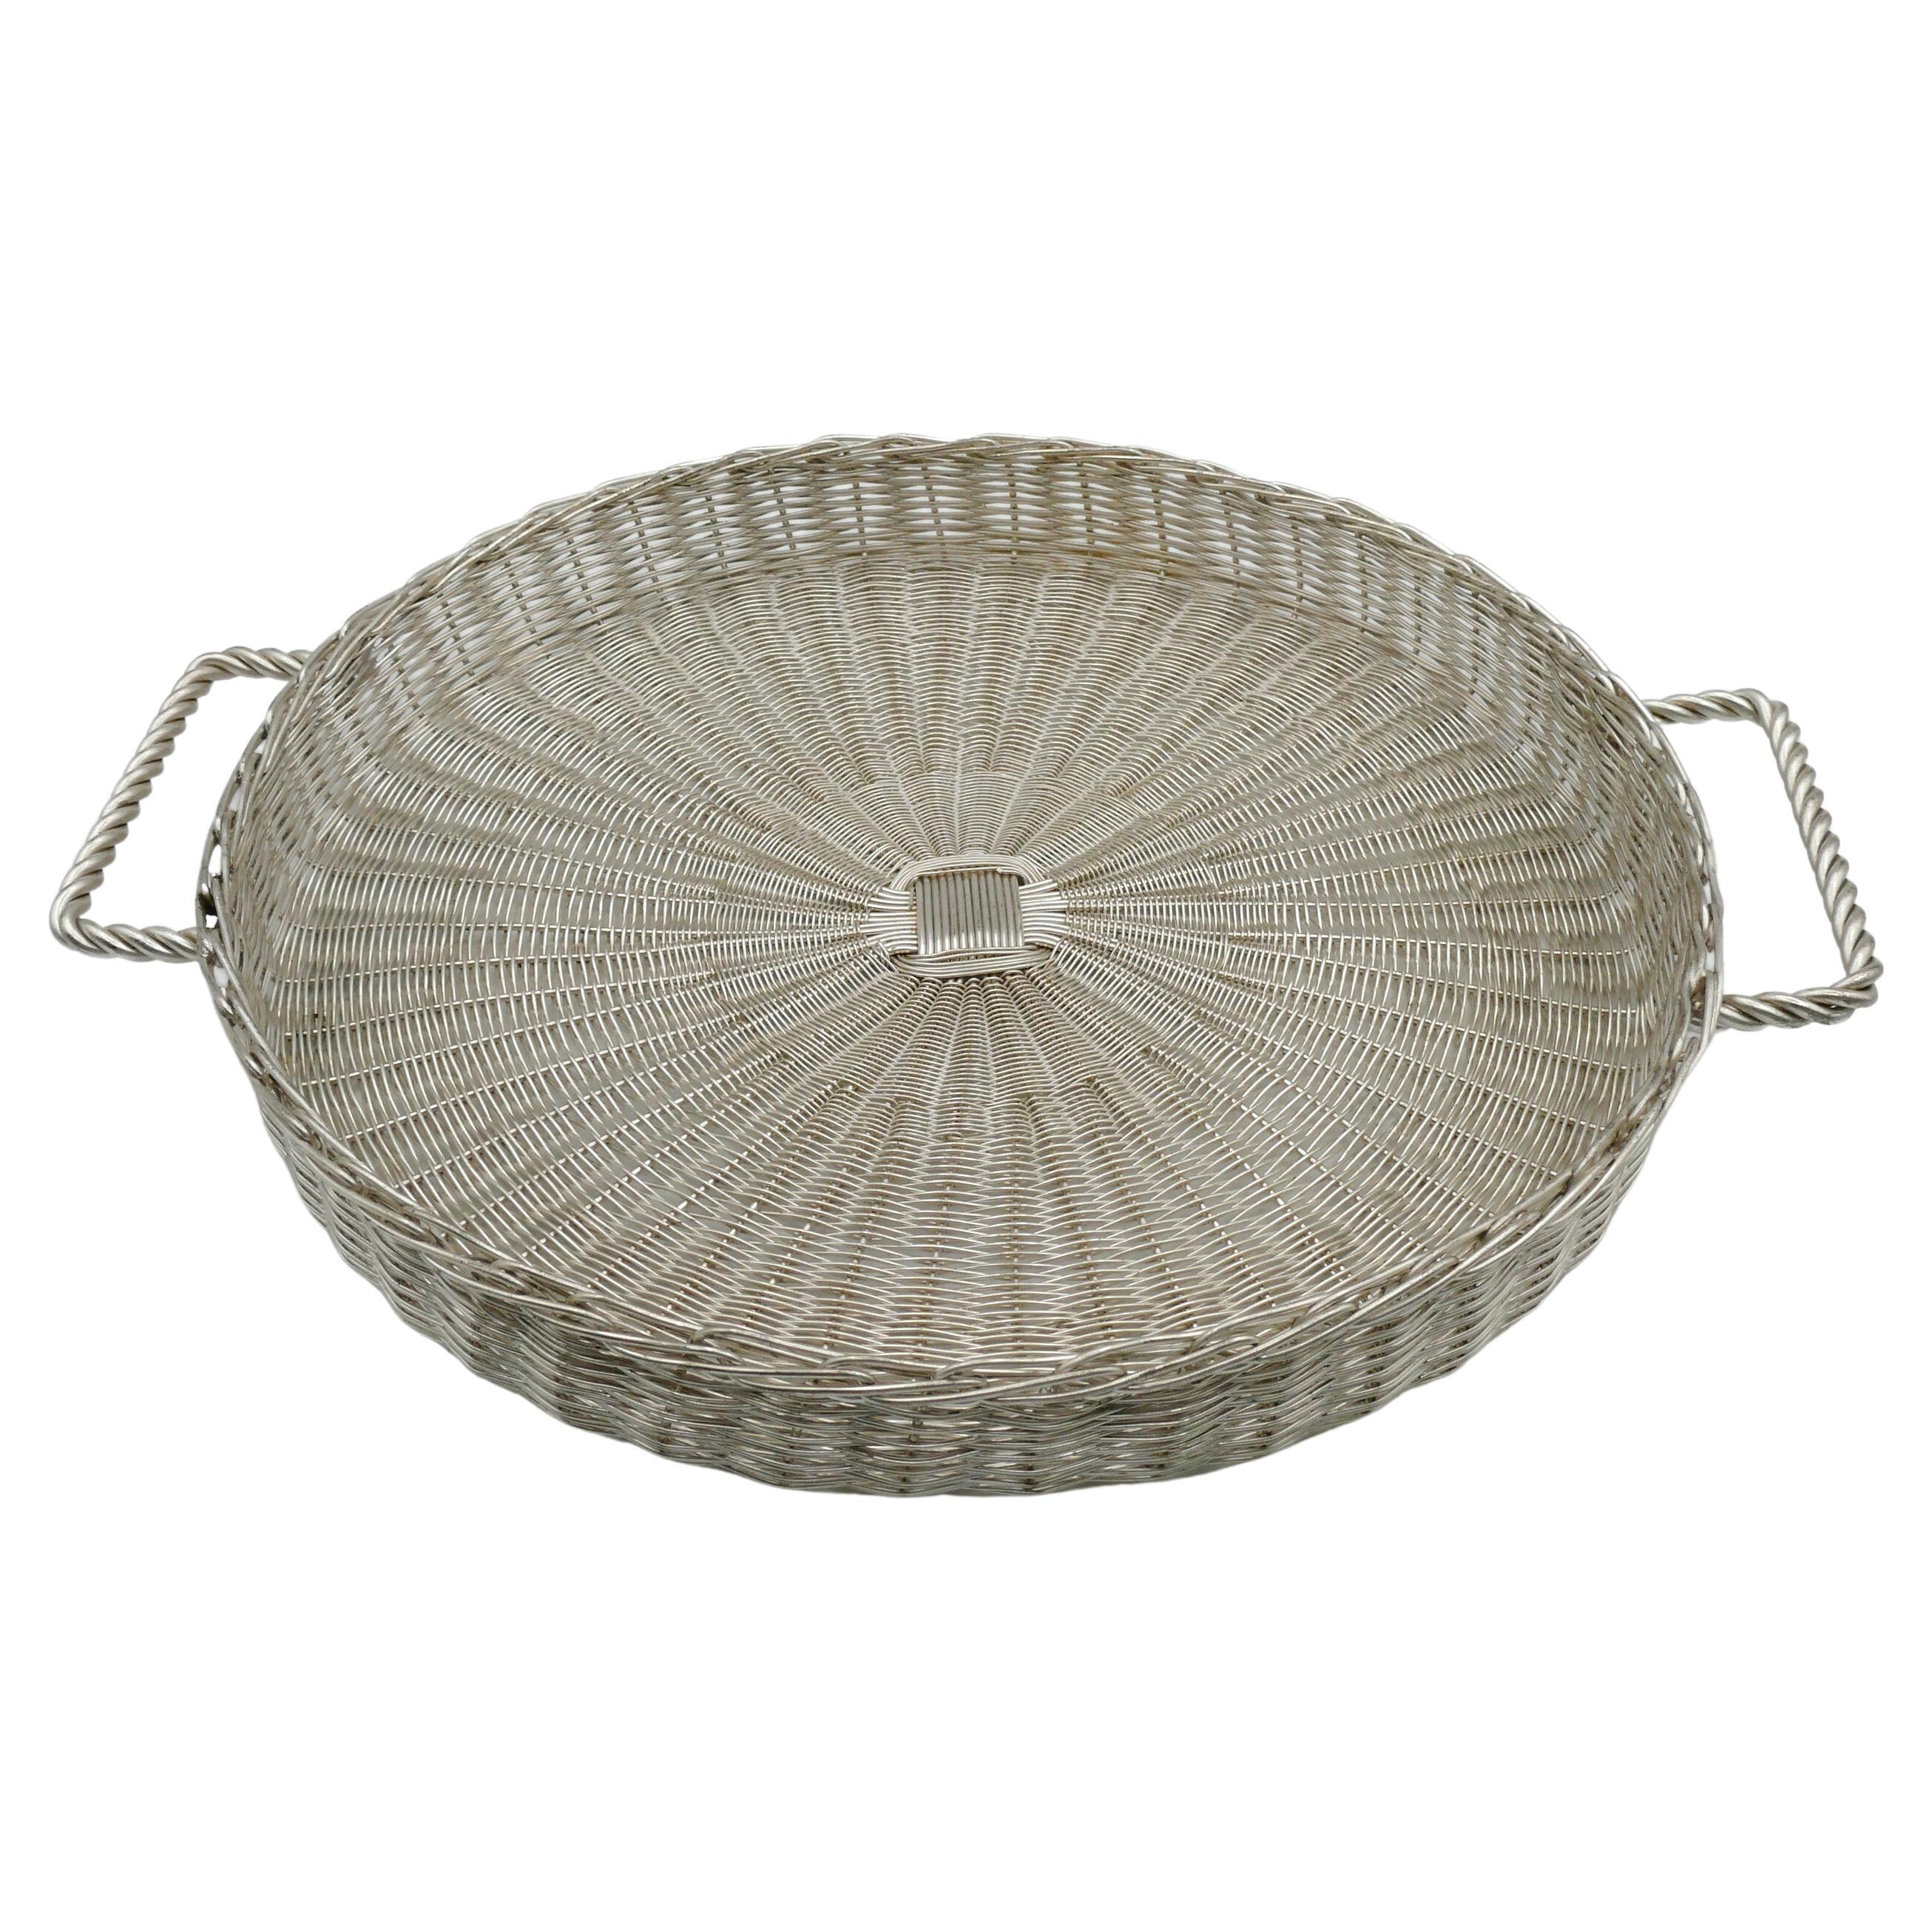 CHRISTIAN DIOR Home Collection Vintage Silver Plated Wicker Style Basket For Sale